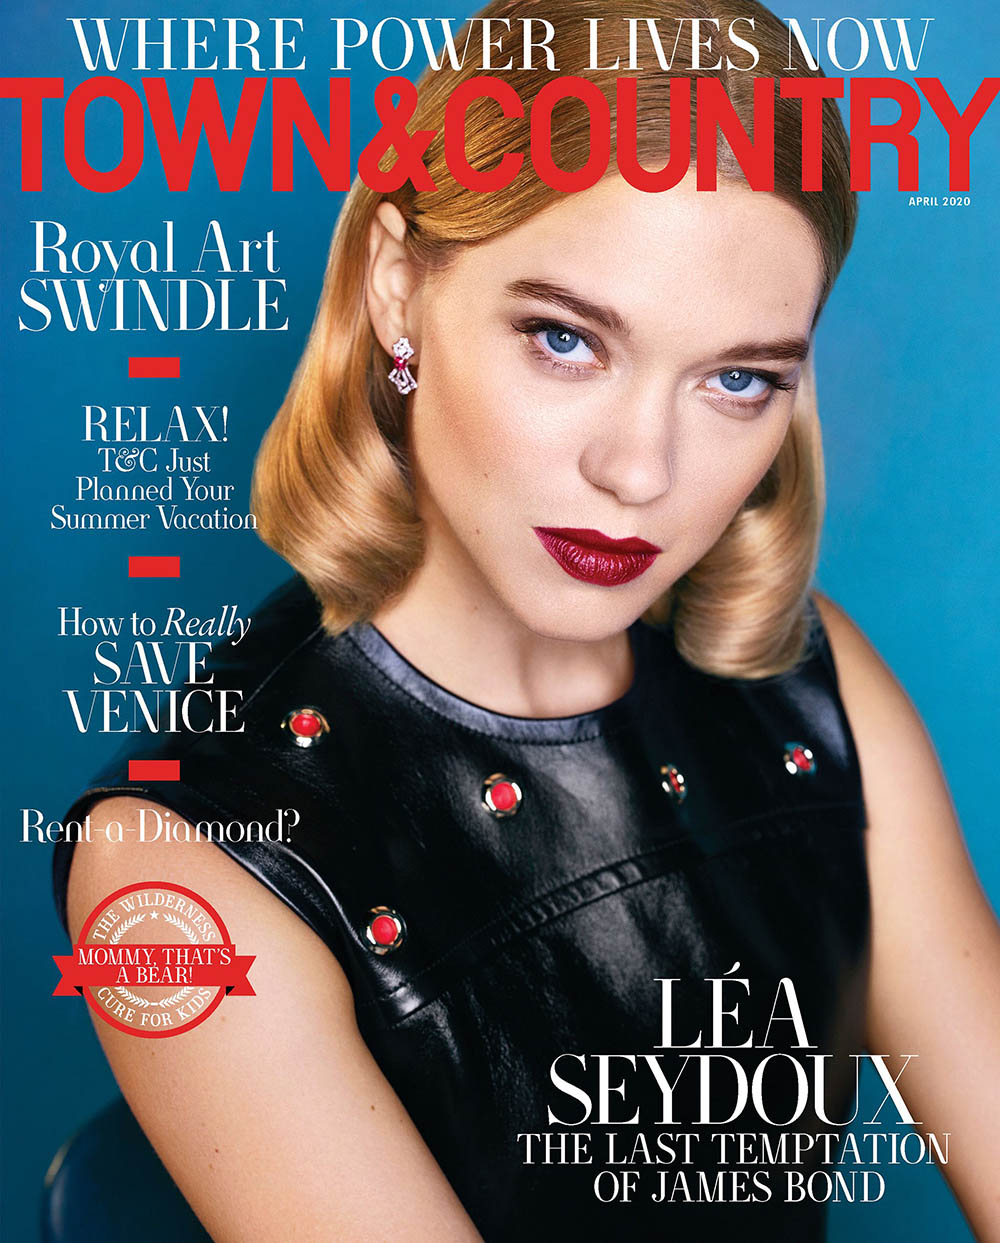 Léa Seydoux covers Town & Country April 2020 by Max Vadukul